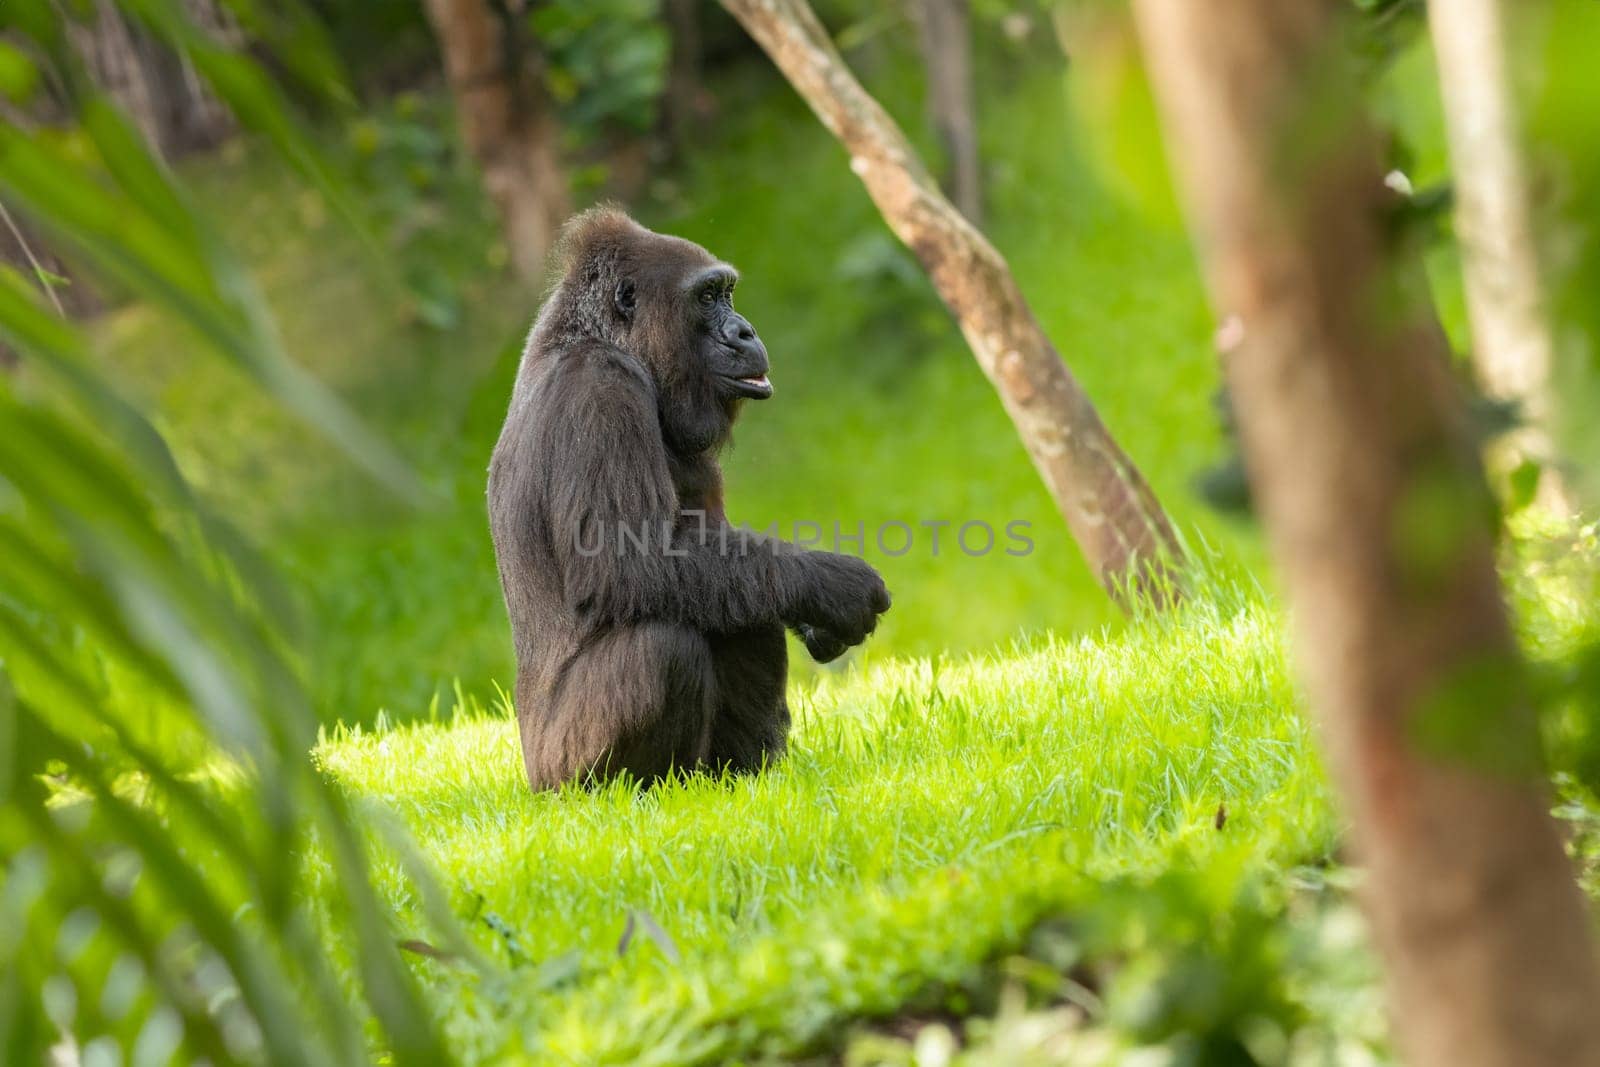 A gorilla sitting in the grass in front of some trees